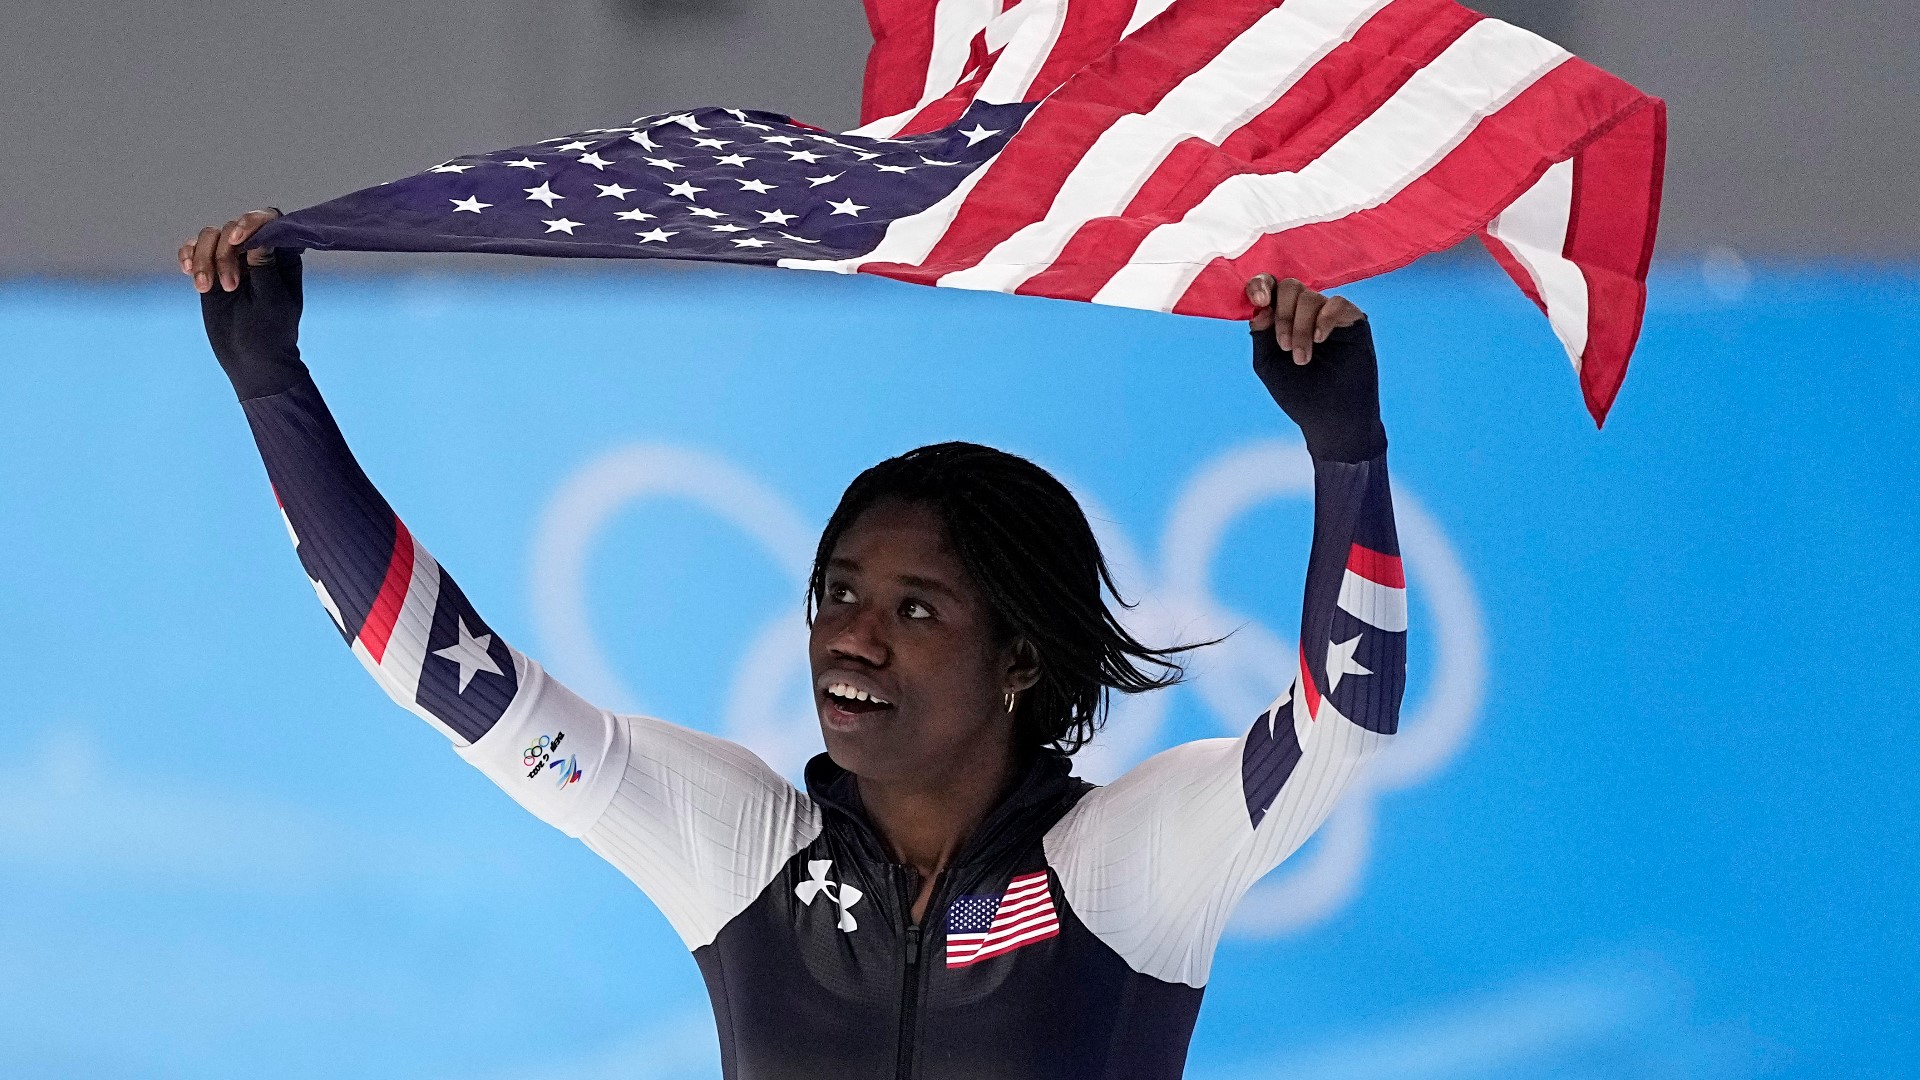 Erin Jackson's historic win also ended a long drought for U.S. speedskating. And a new U.S. citizen won gold in a new Olympic event.